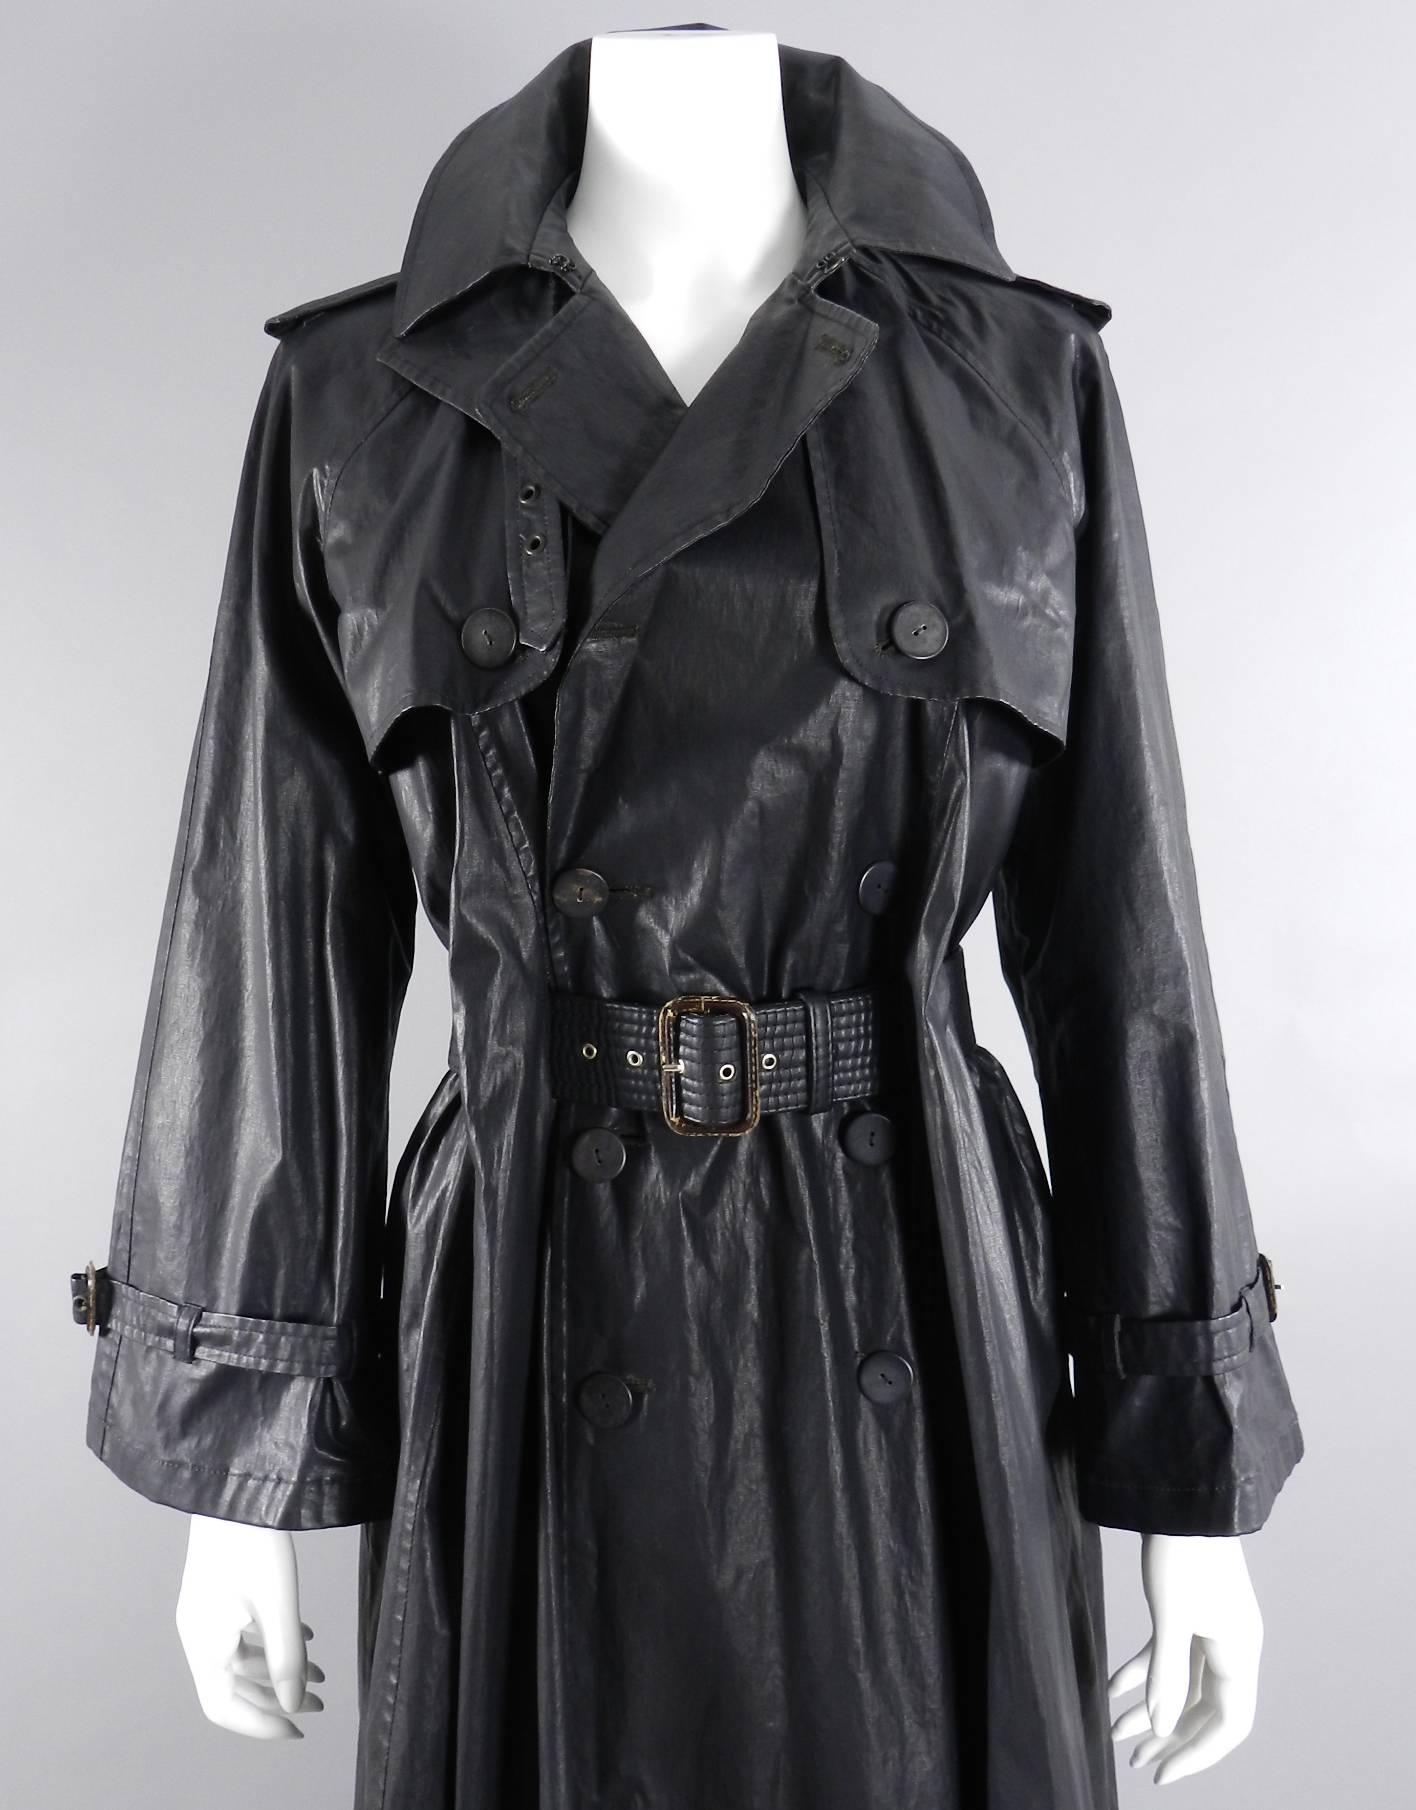 Vintage circa 1990's Jean Paul Gaultier waxed canvas trench coat. Belt weaves through slits / belt-holes in jacket. There are small tears / old repairs on 3 out of 5 of the belt holes. The most damaged one is pictured. Does not detract when worn.